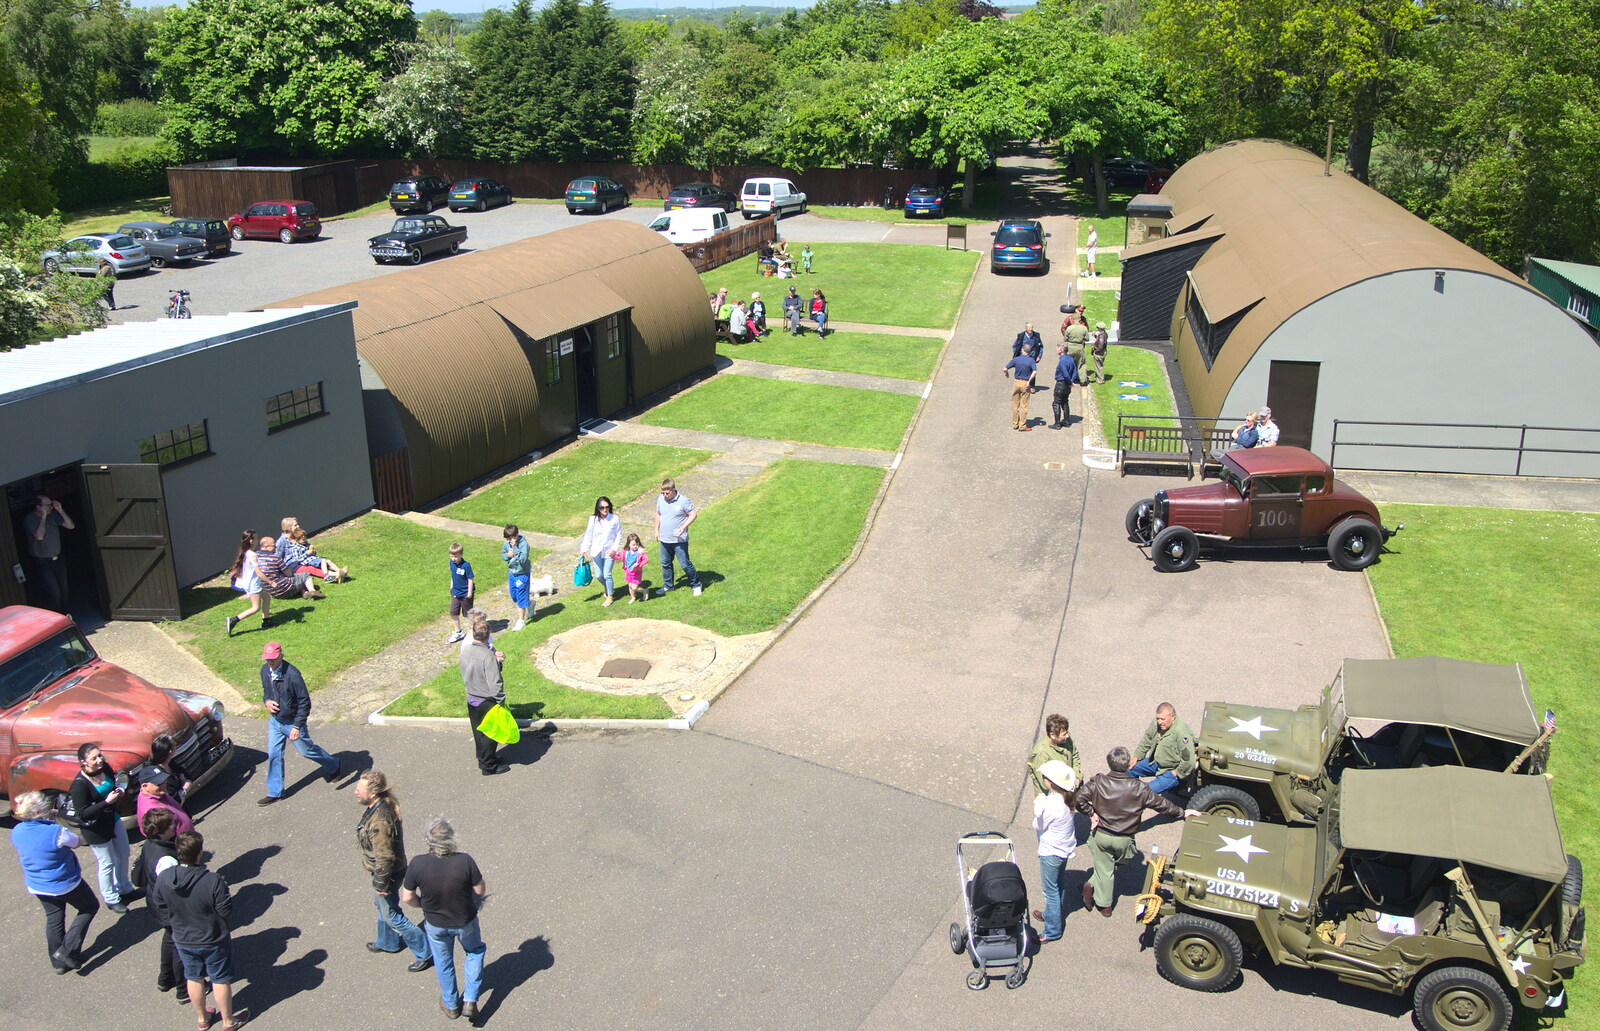 The view from the control tower from A "Sally B" B-17 Flypast, Thorpe Abbots, Norfolk - 27th May 2013